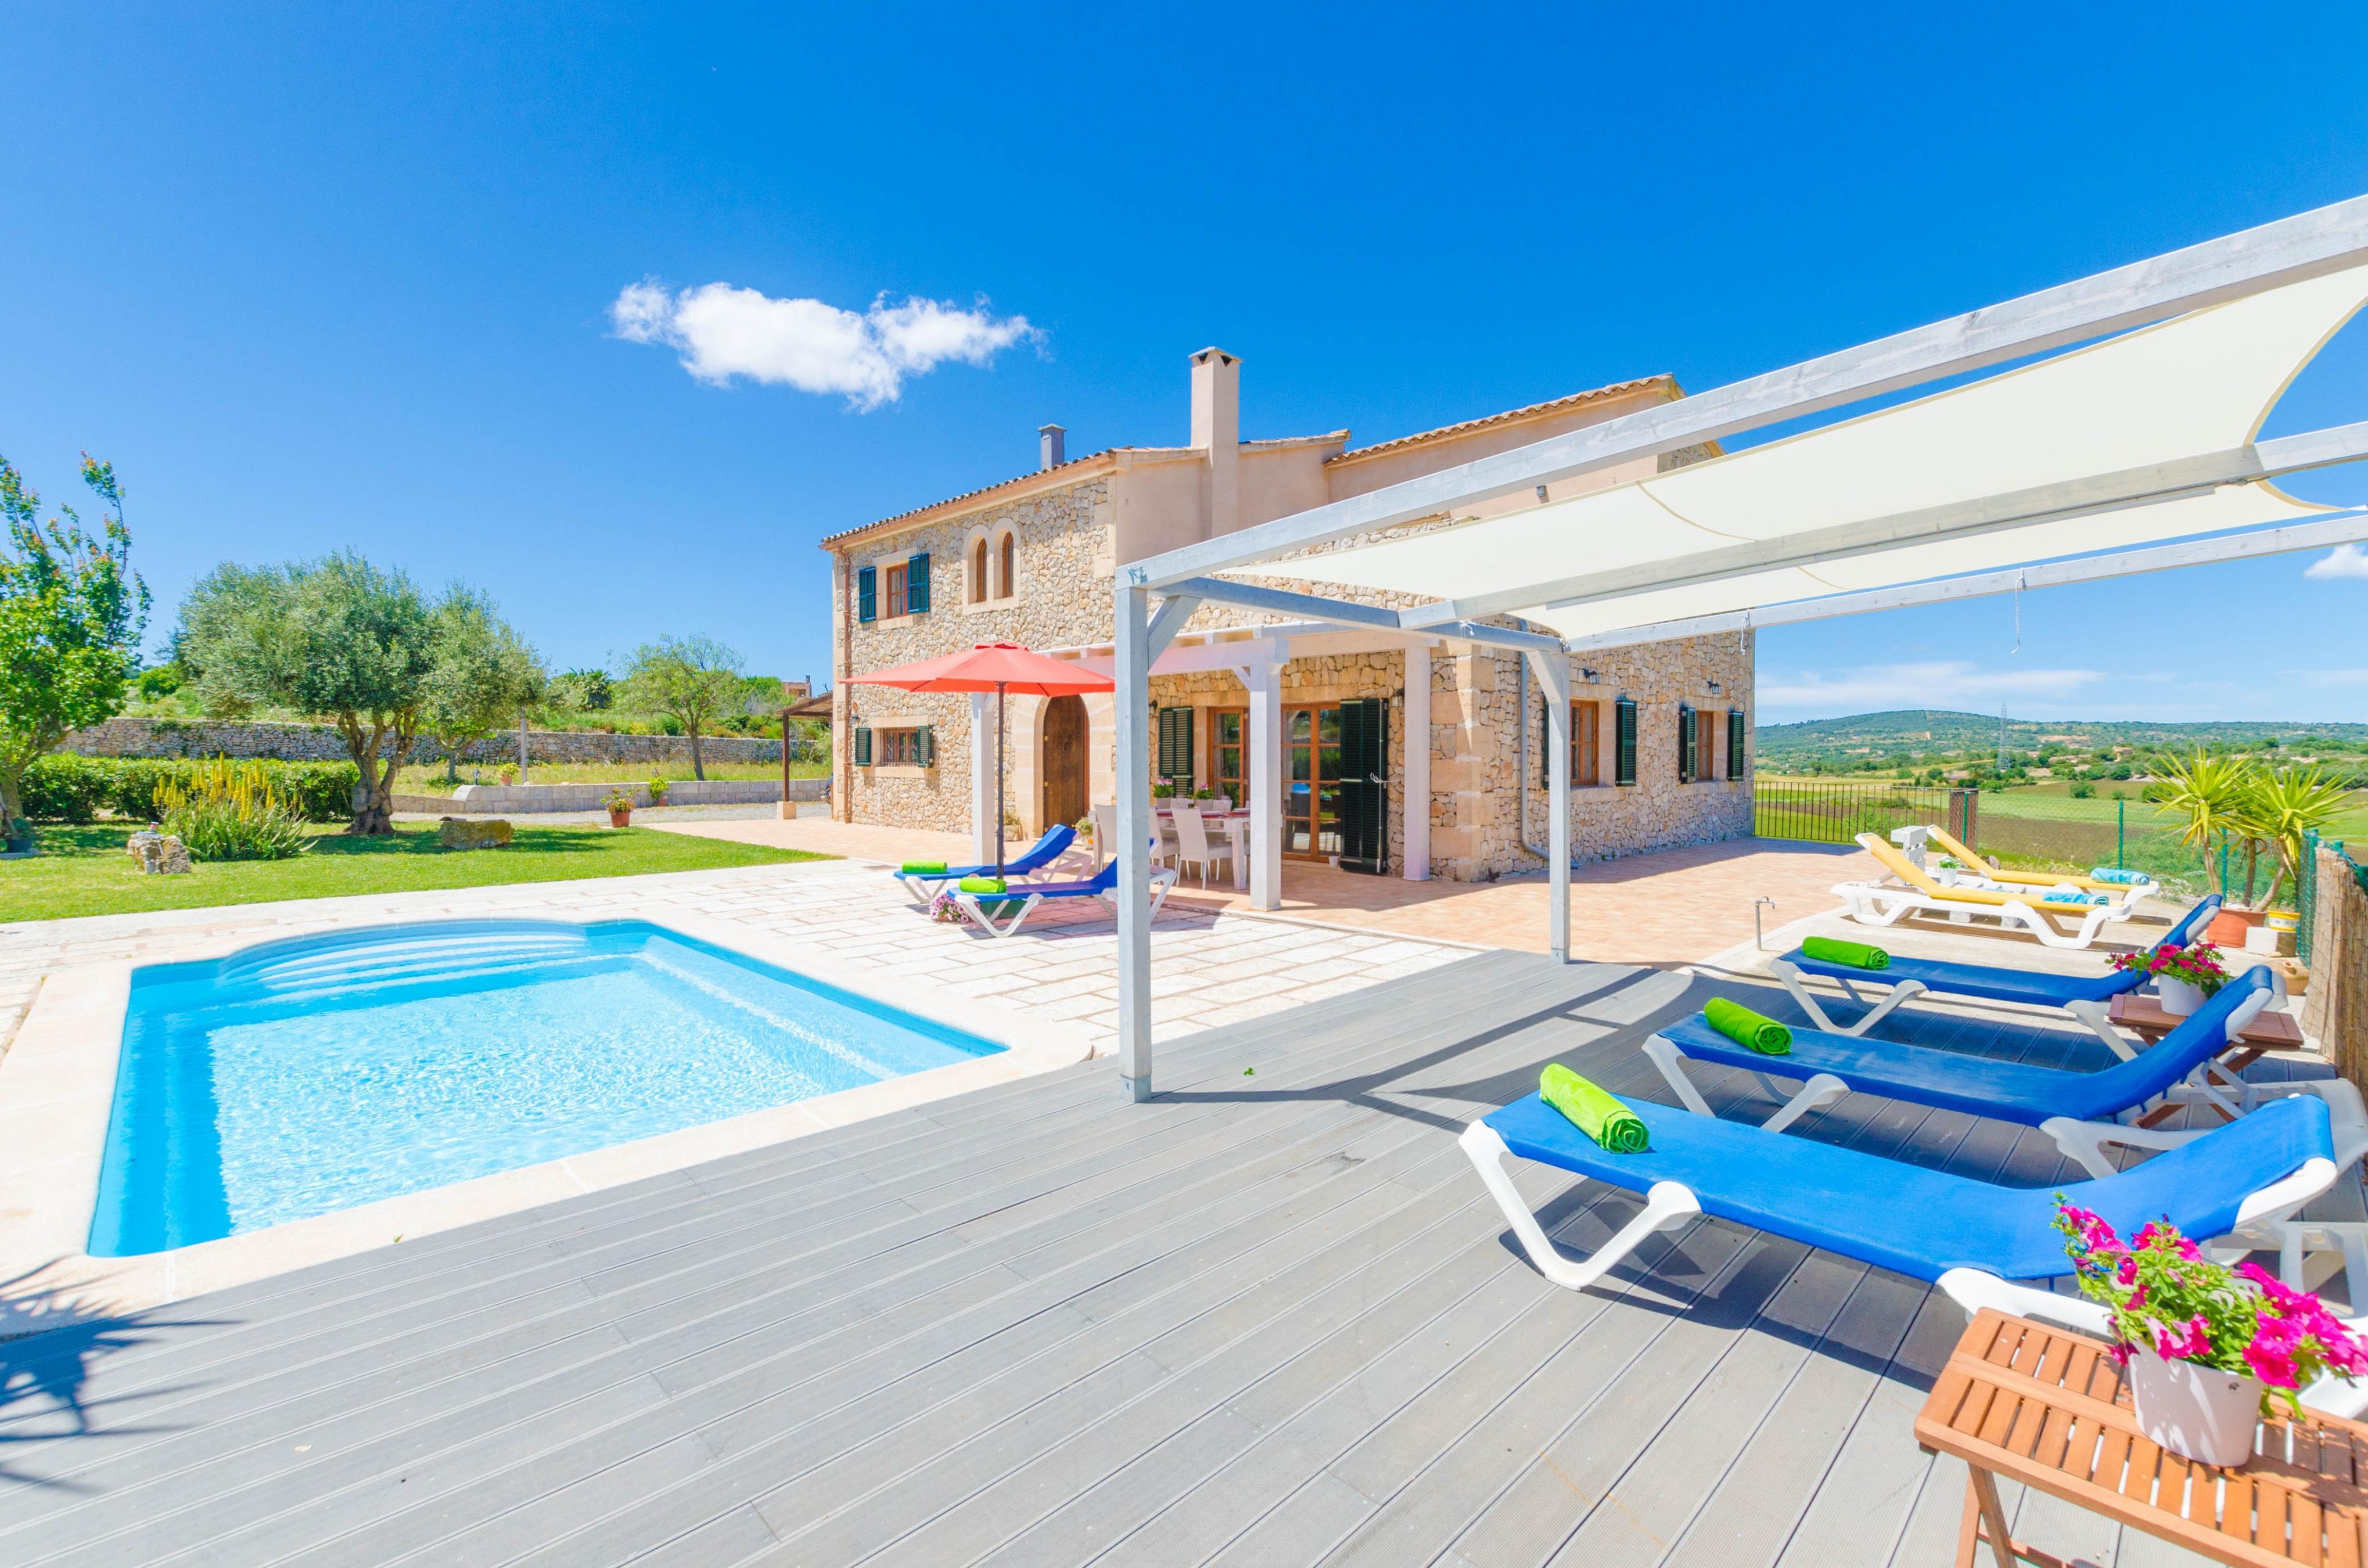 Property Image 2 - ANGIGAL - Spectacular villa with private pool in the tranquility of the countryside. Free WIFI.